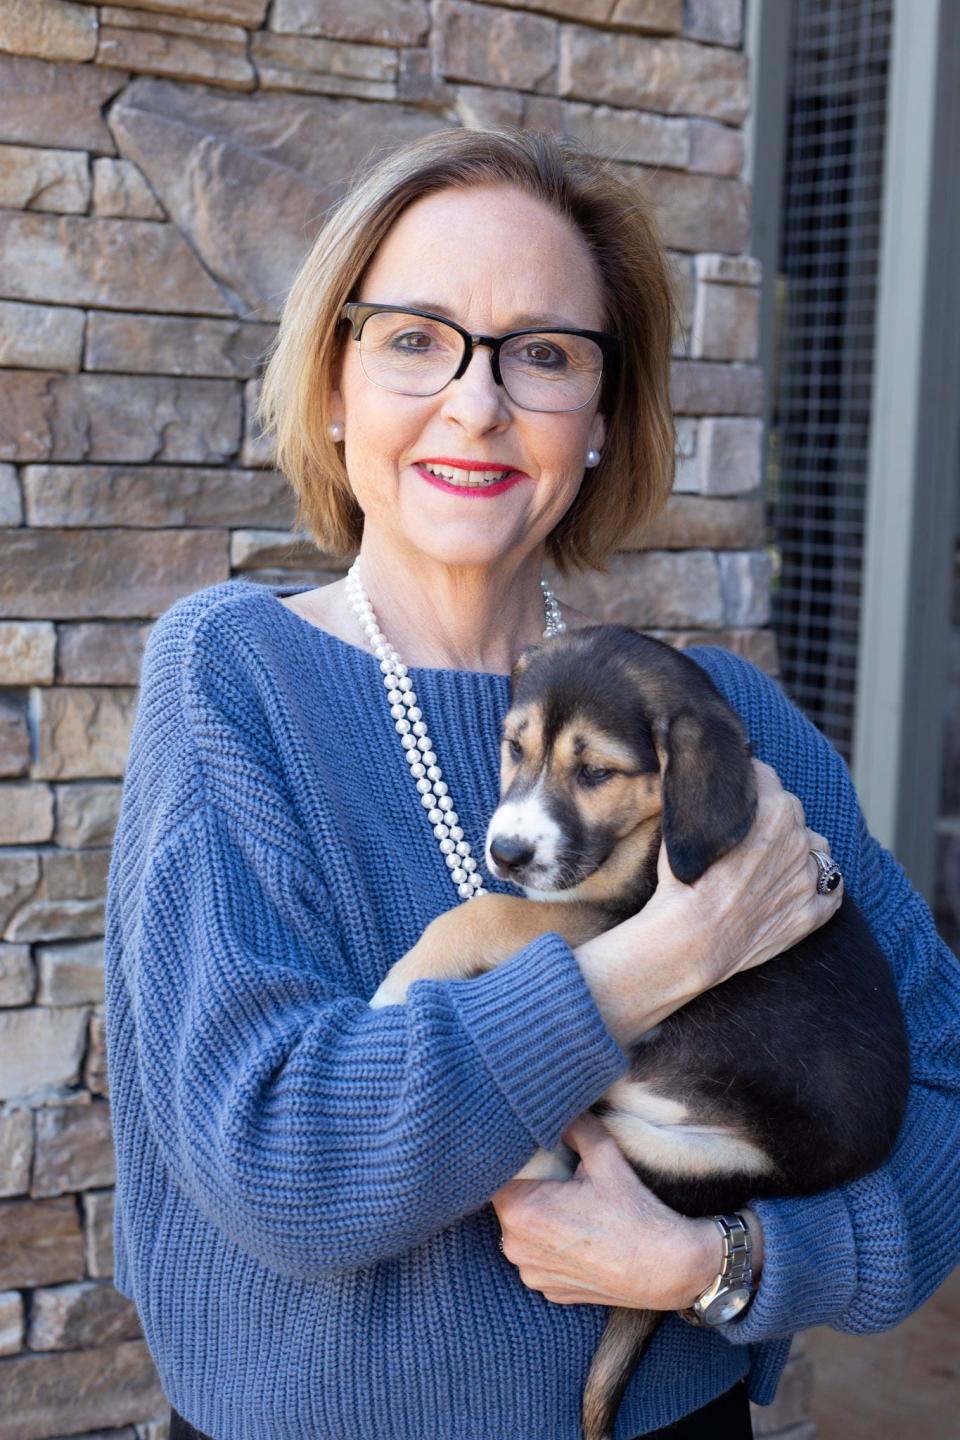 Young-Williams Animal Center has hired Holly Jackson-Sullivan of Oak Ridge as vice president of development to lead, develop and implement fundraising strategies. May 2024